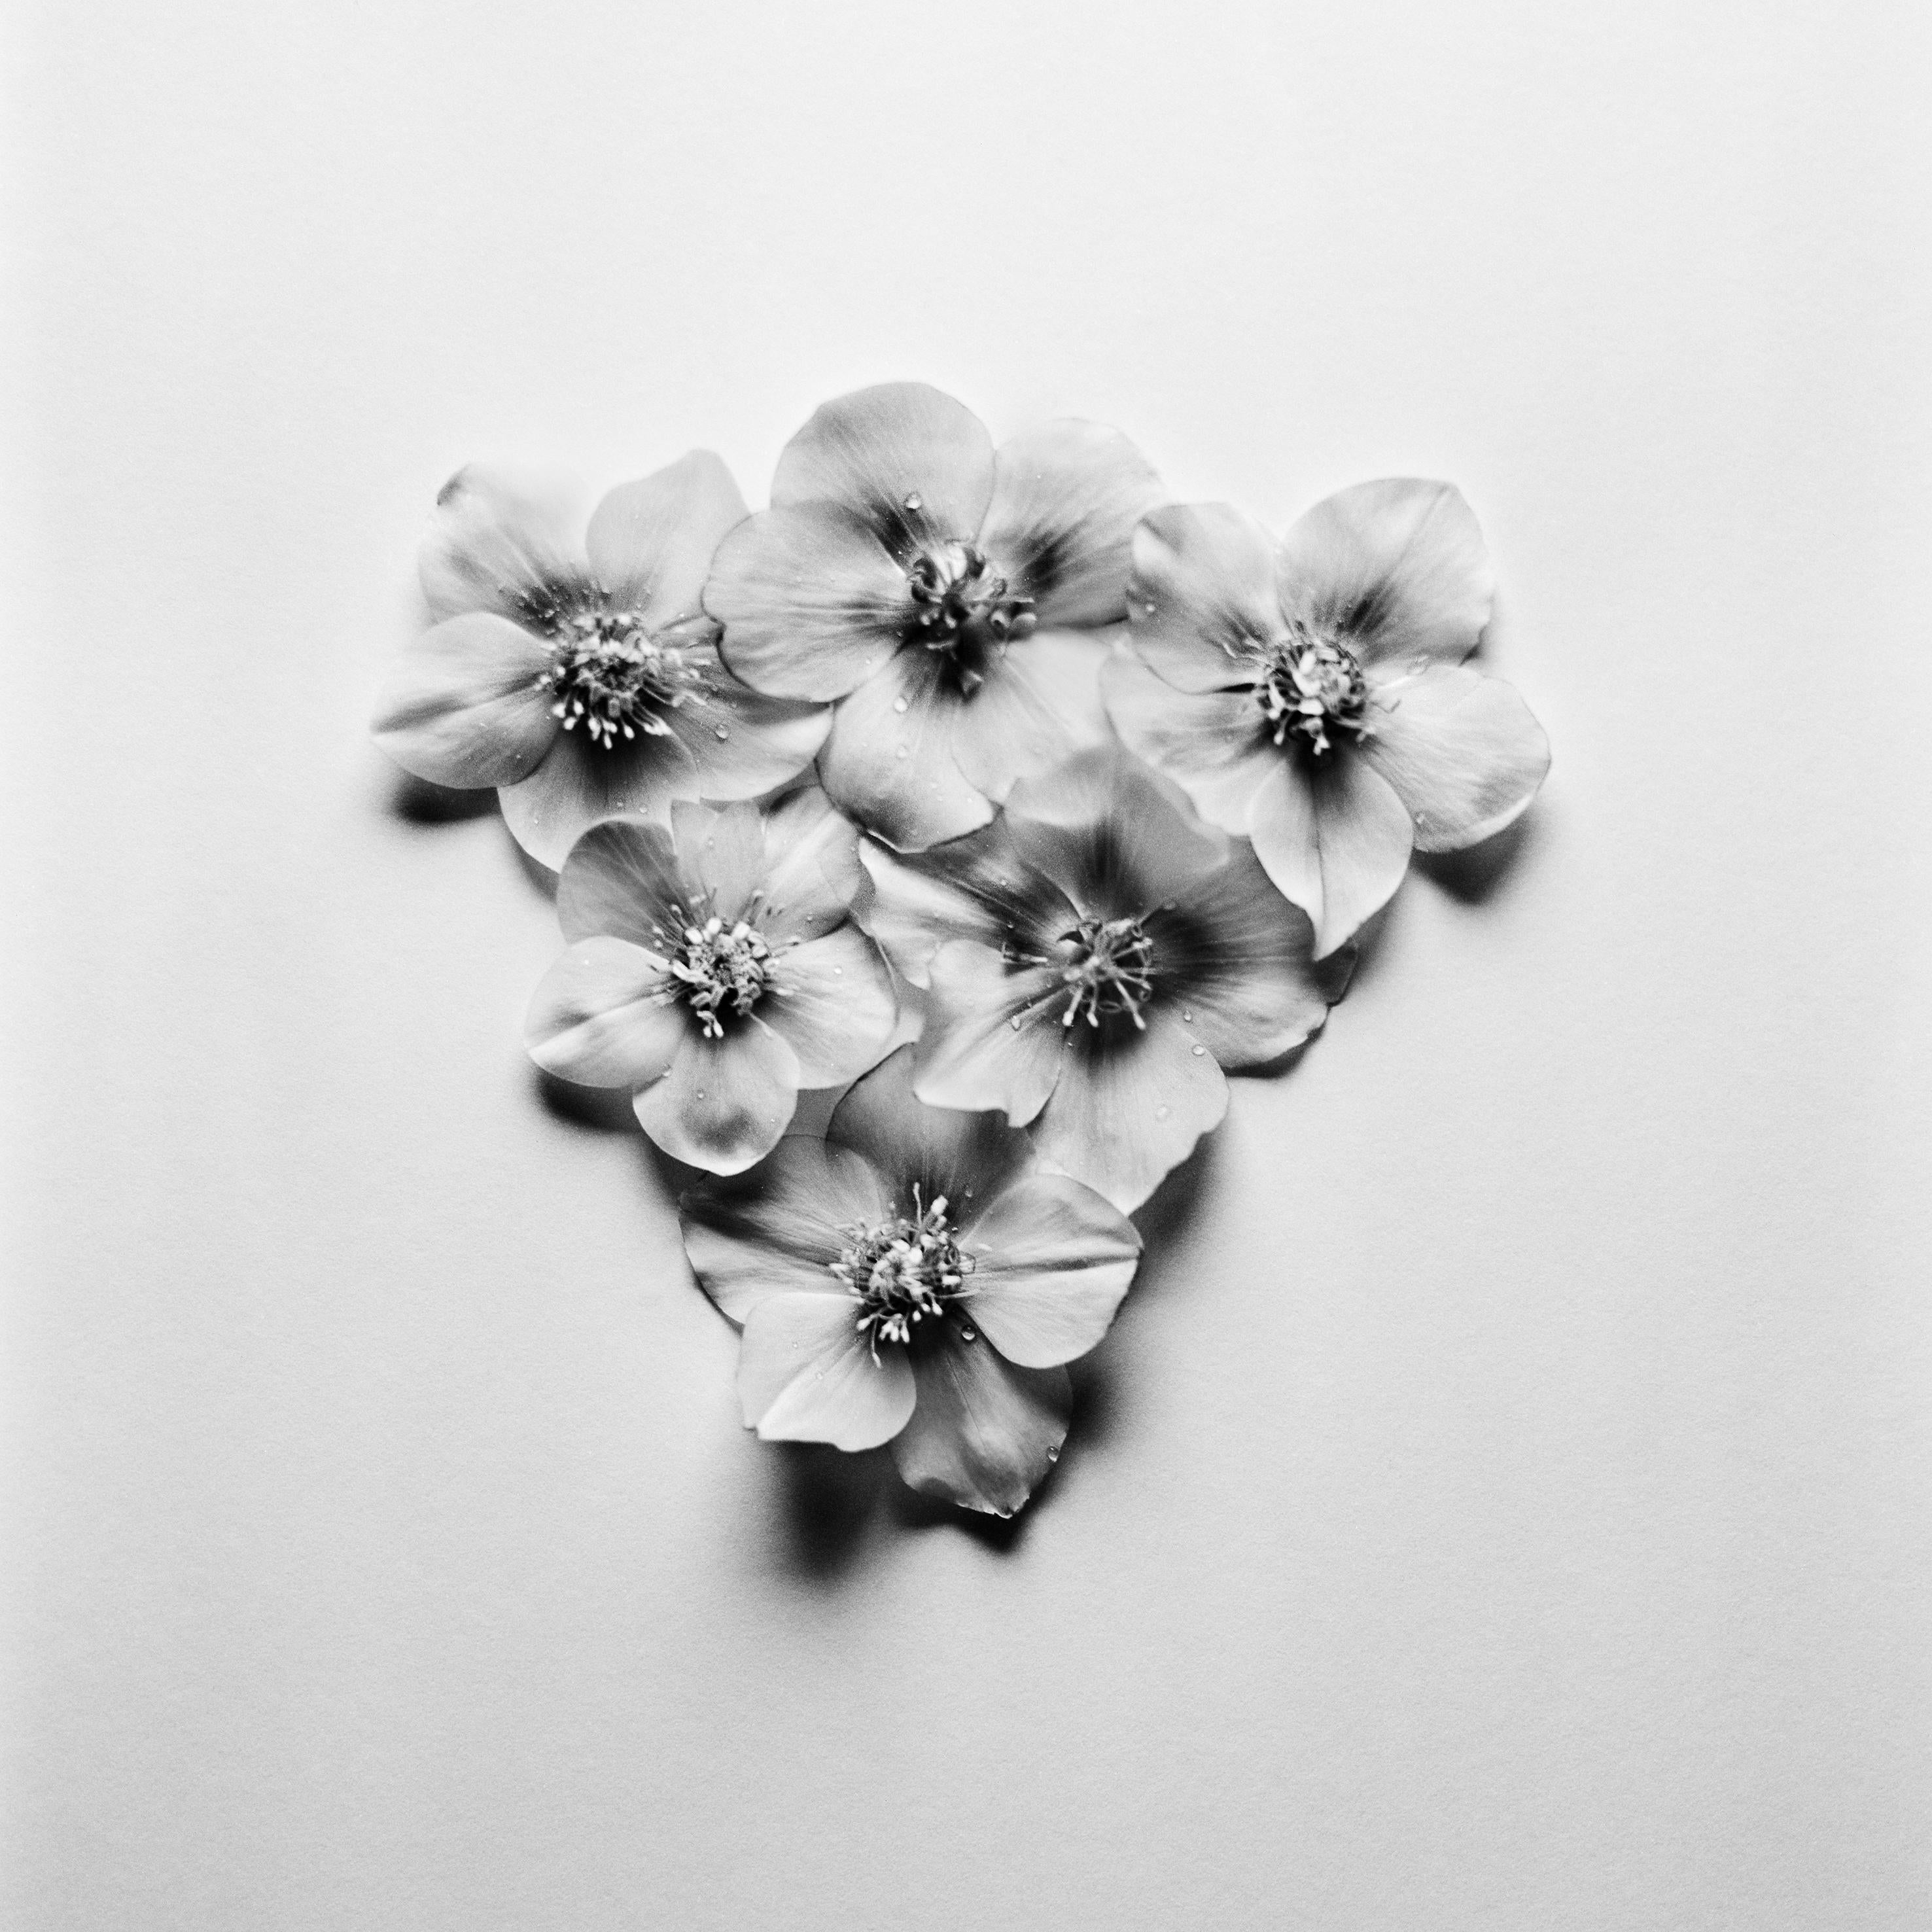 Ugne Pouwell Black and White Photograph - Black Hellebore No.3 - black and white floral photography, Limited edition 10